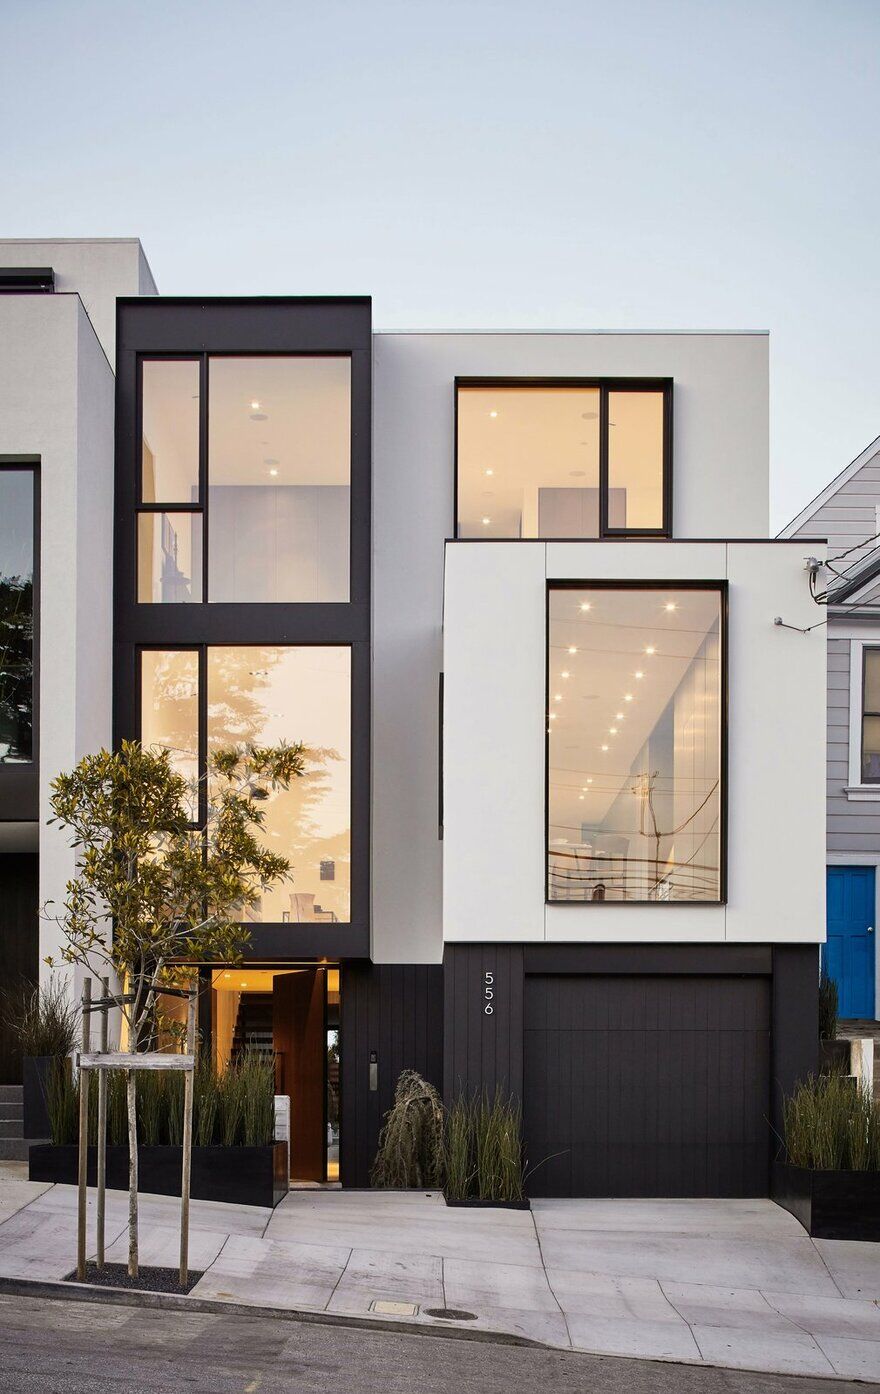 Noe Valley Modern House Reimagined and Expanded by MAK Studio